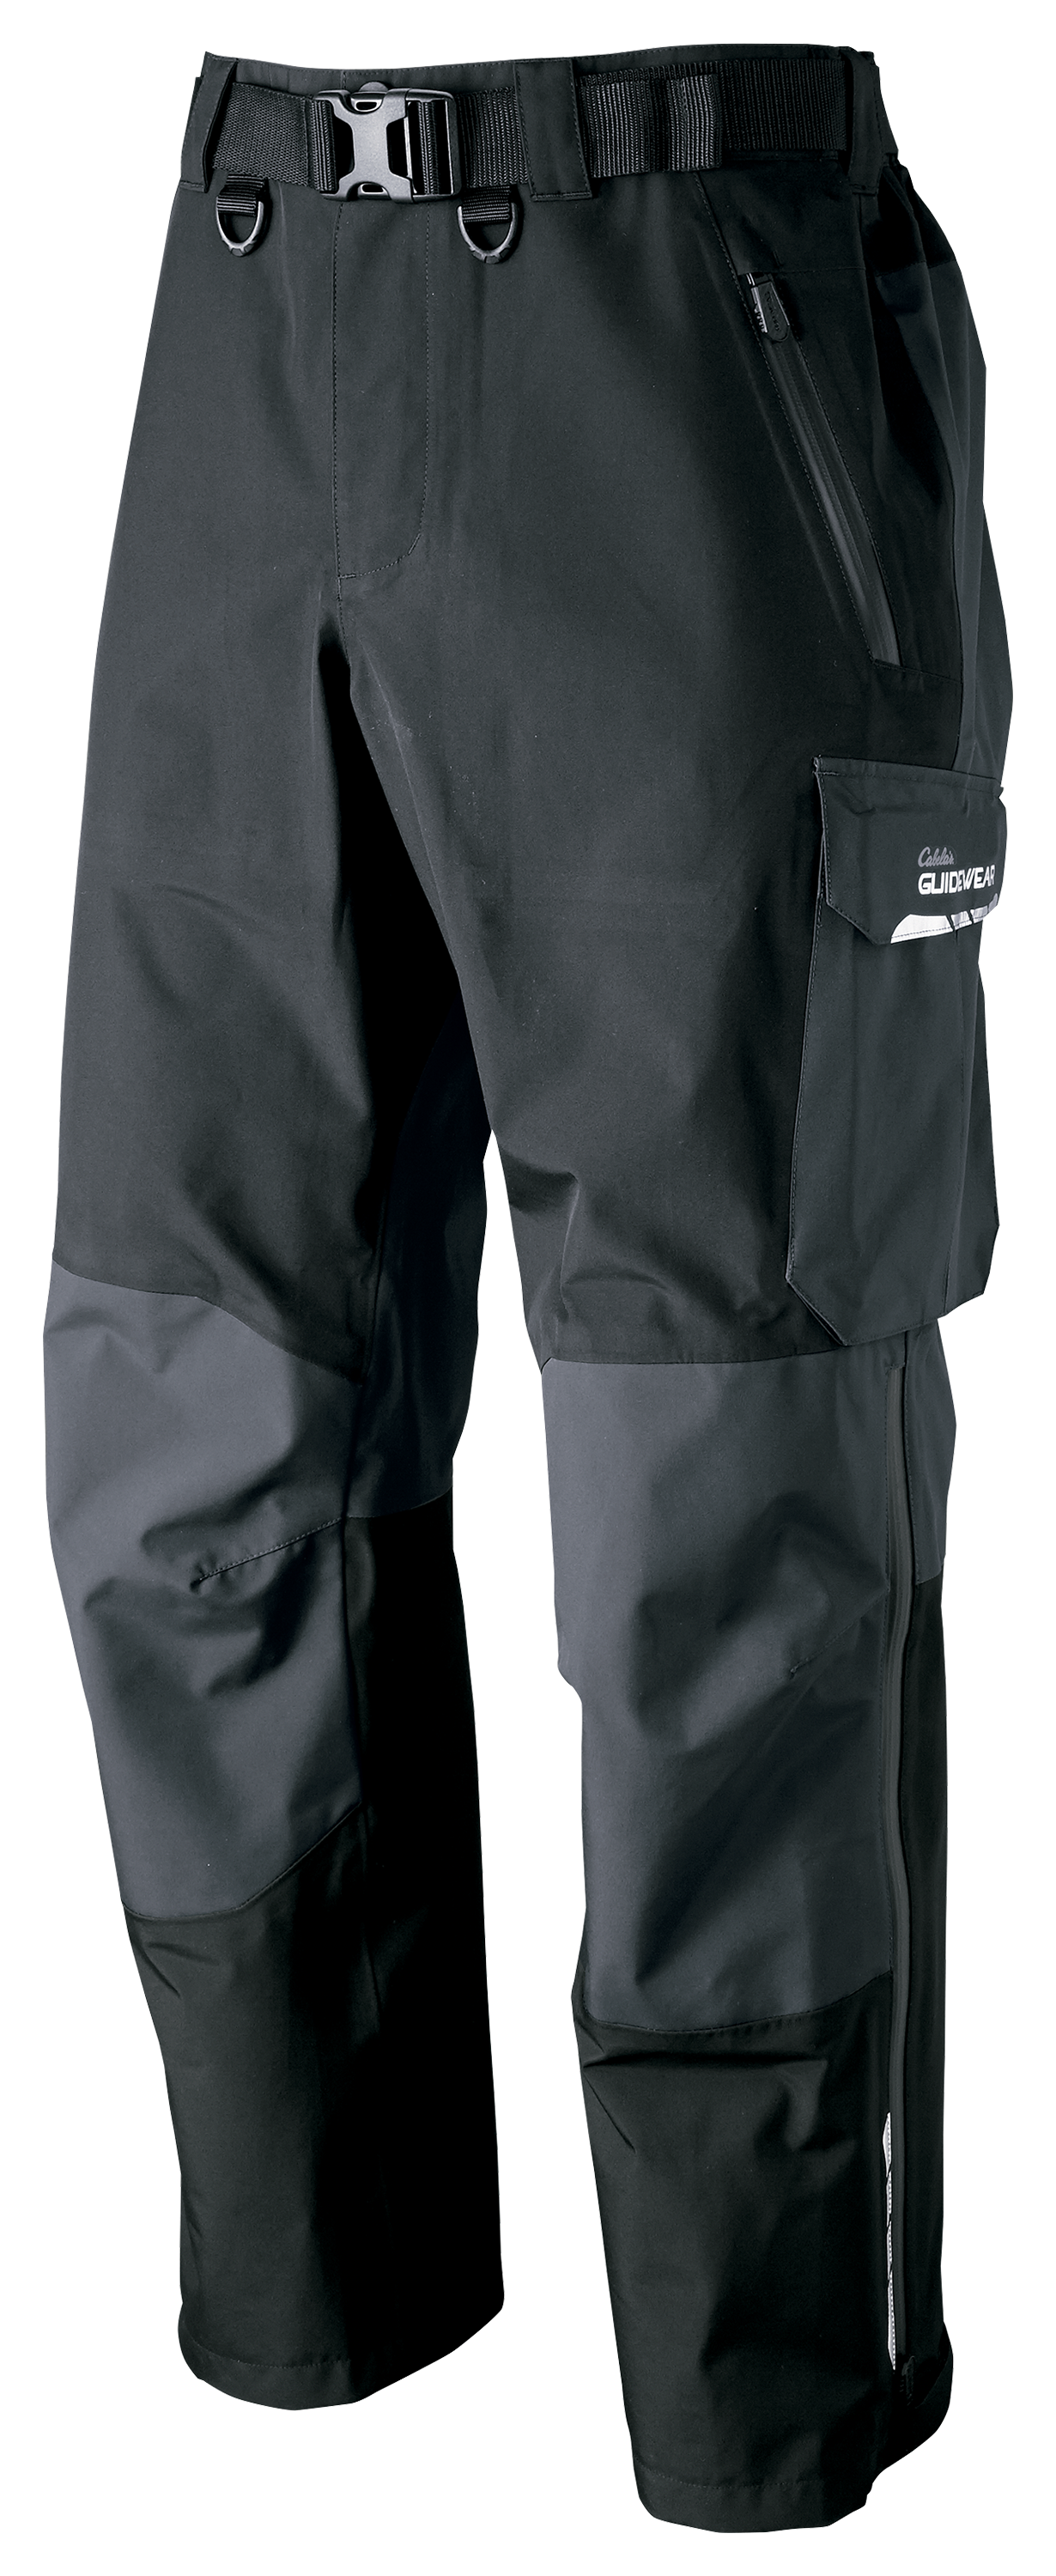 Cabela's Guidewear Angler Pants with GORE-TEX for Men